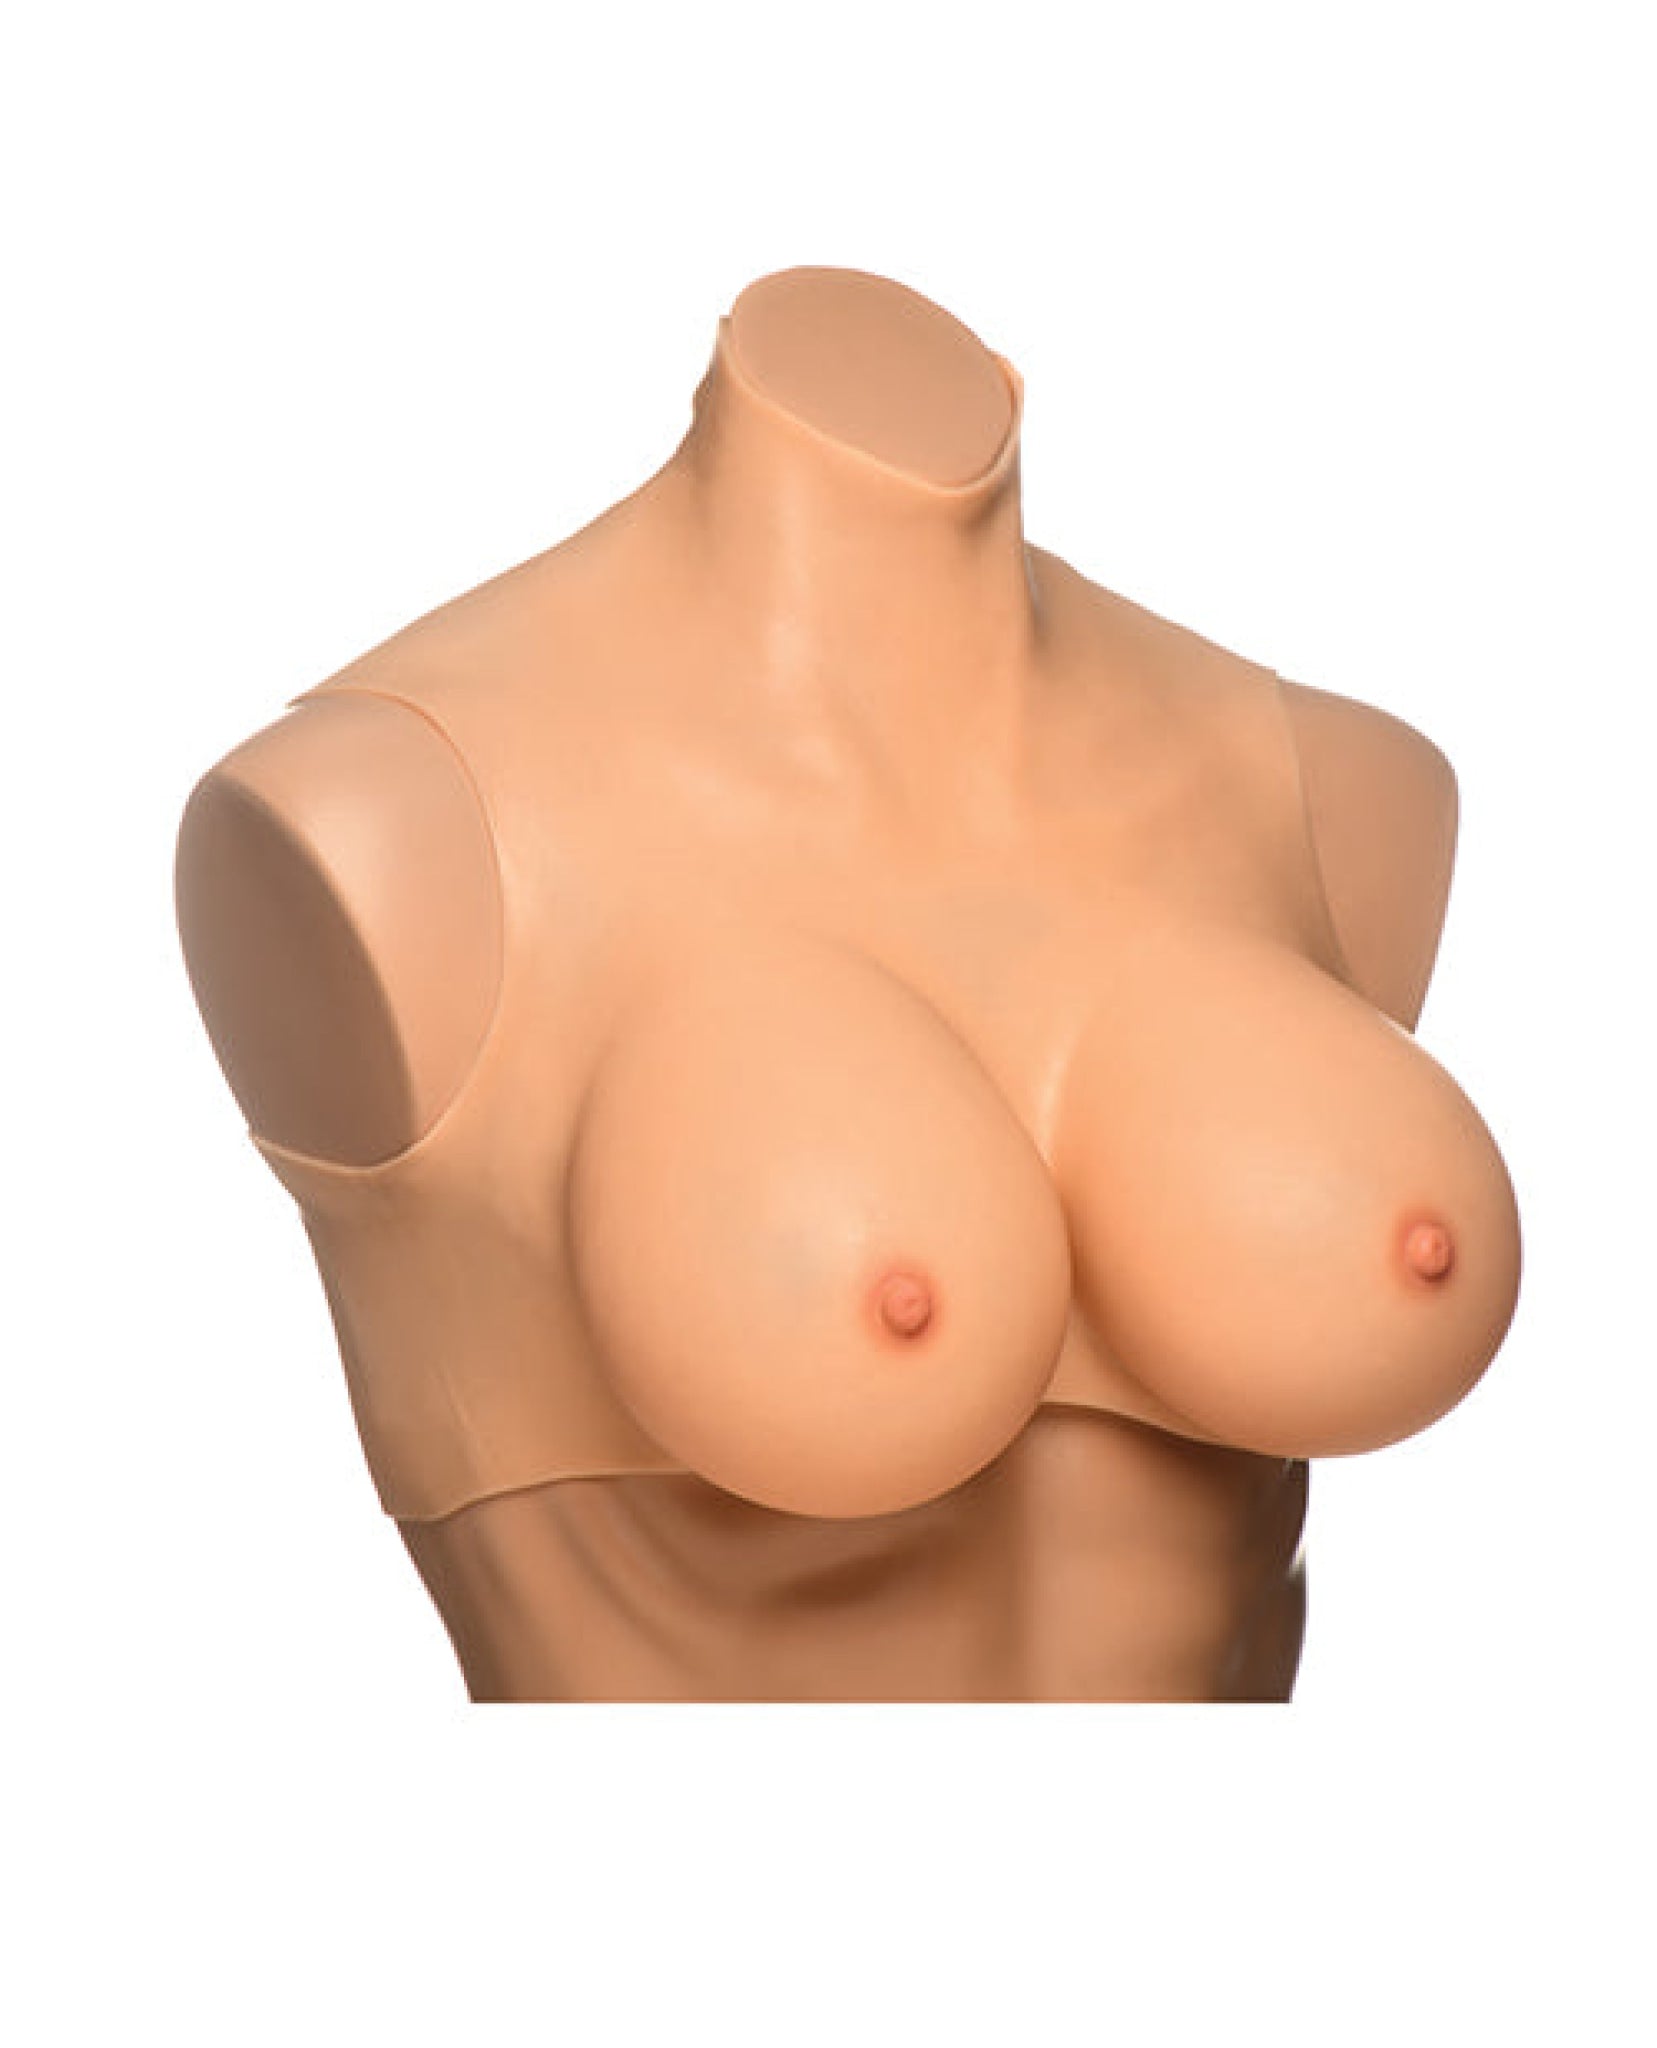 Master Series Perky Pair G Cup Silicone Breasts Xr LLC